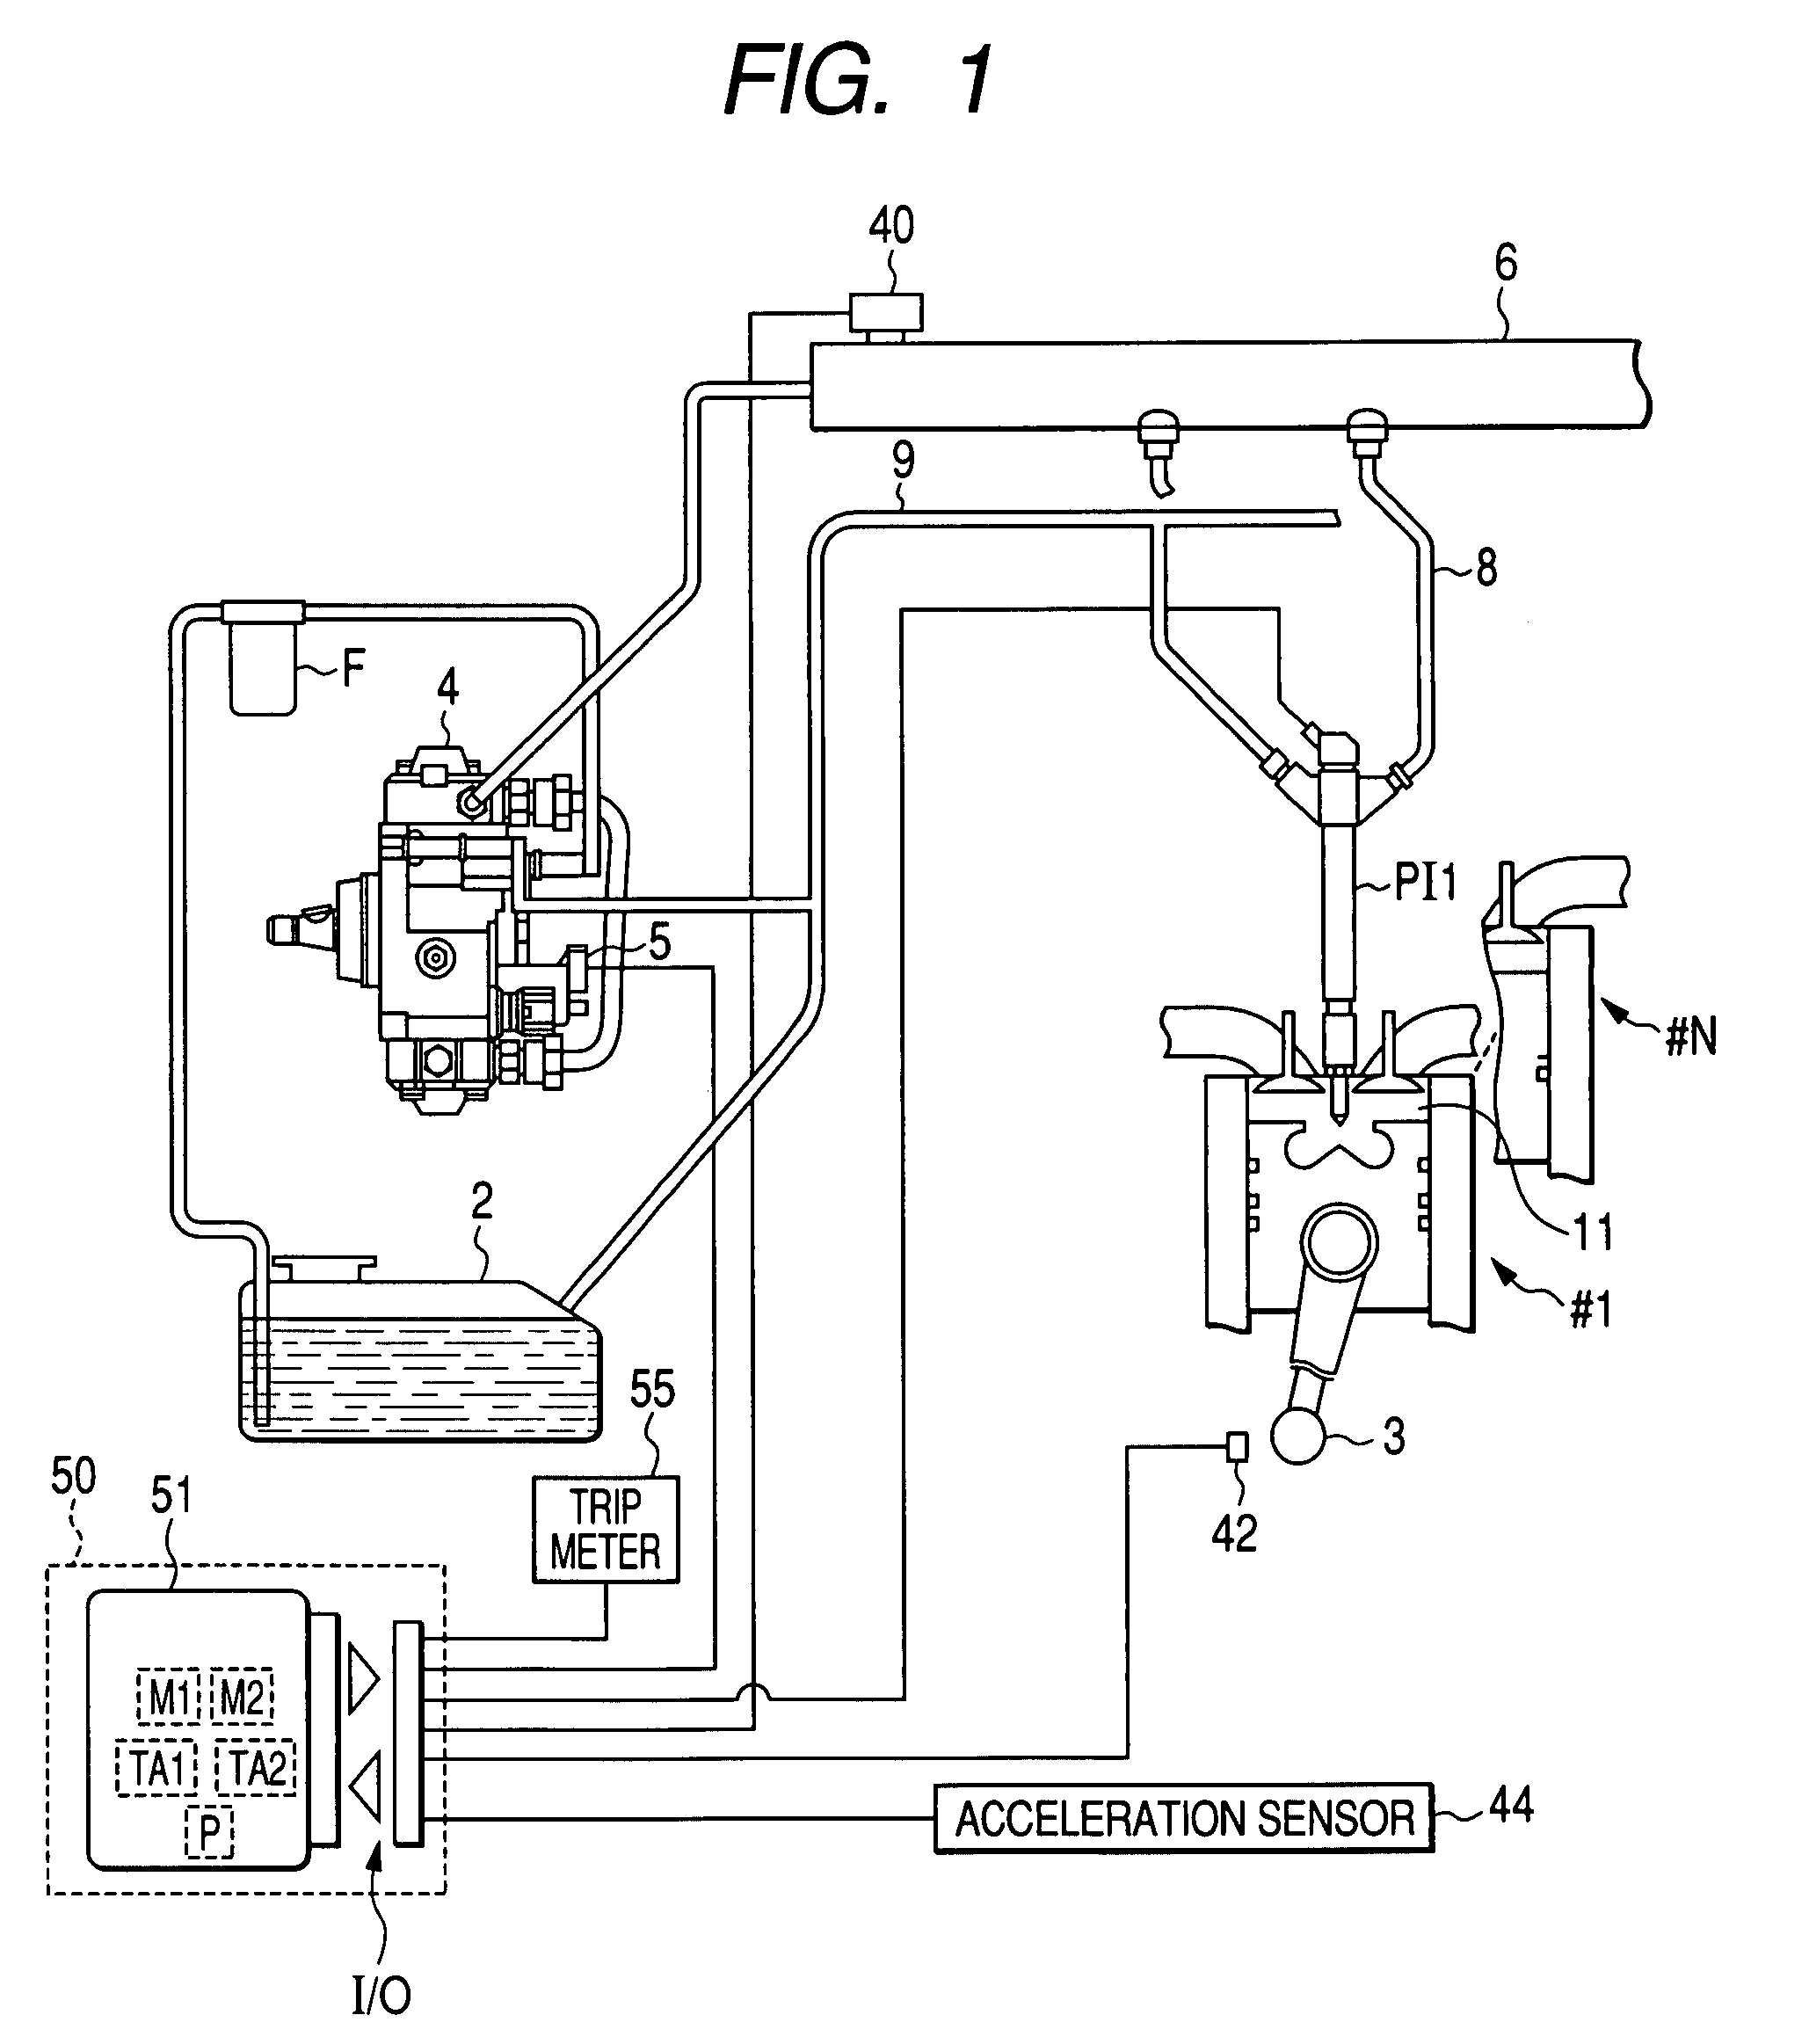 Fuel injection control system